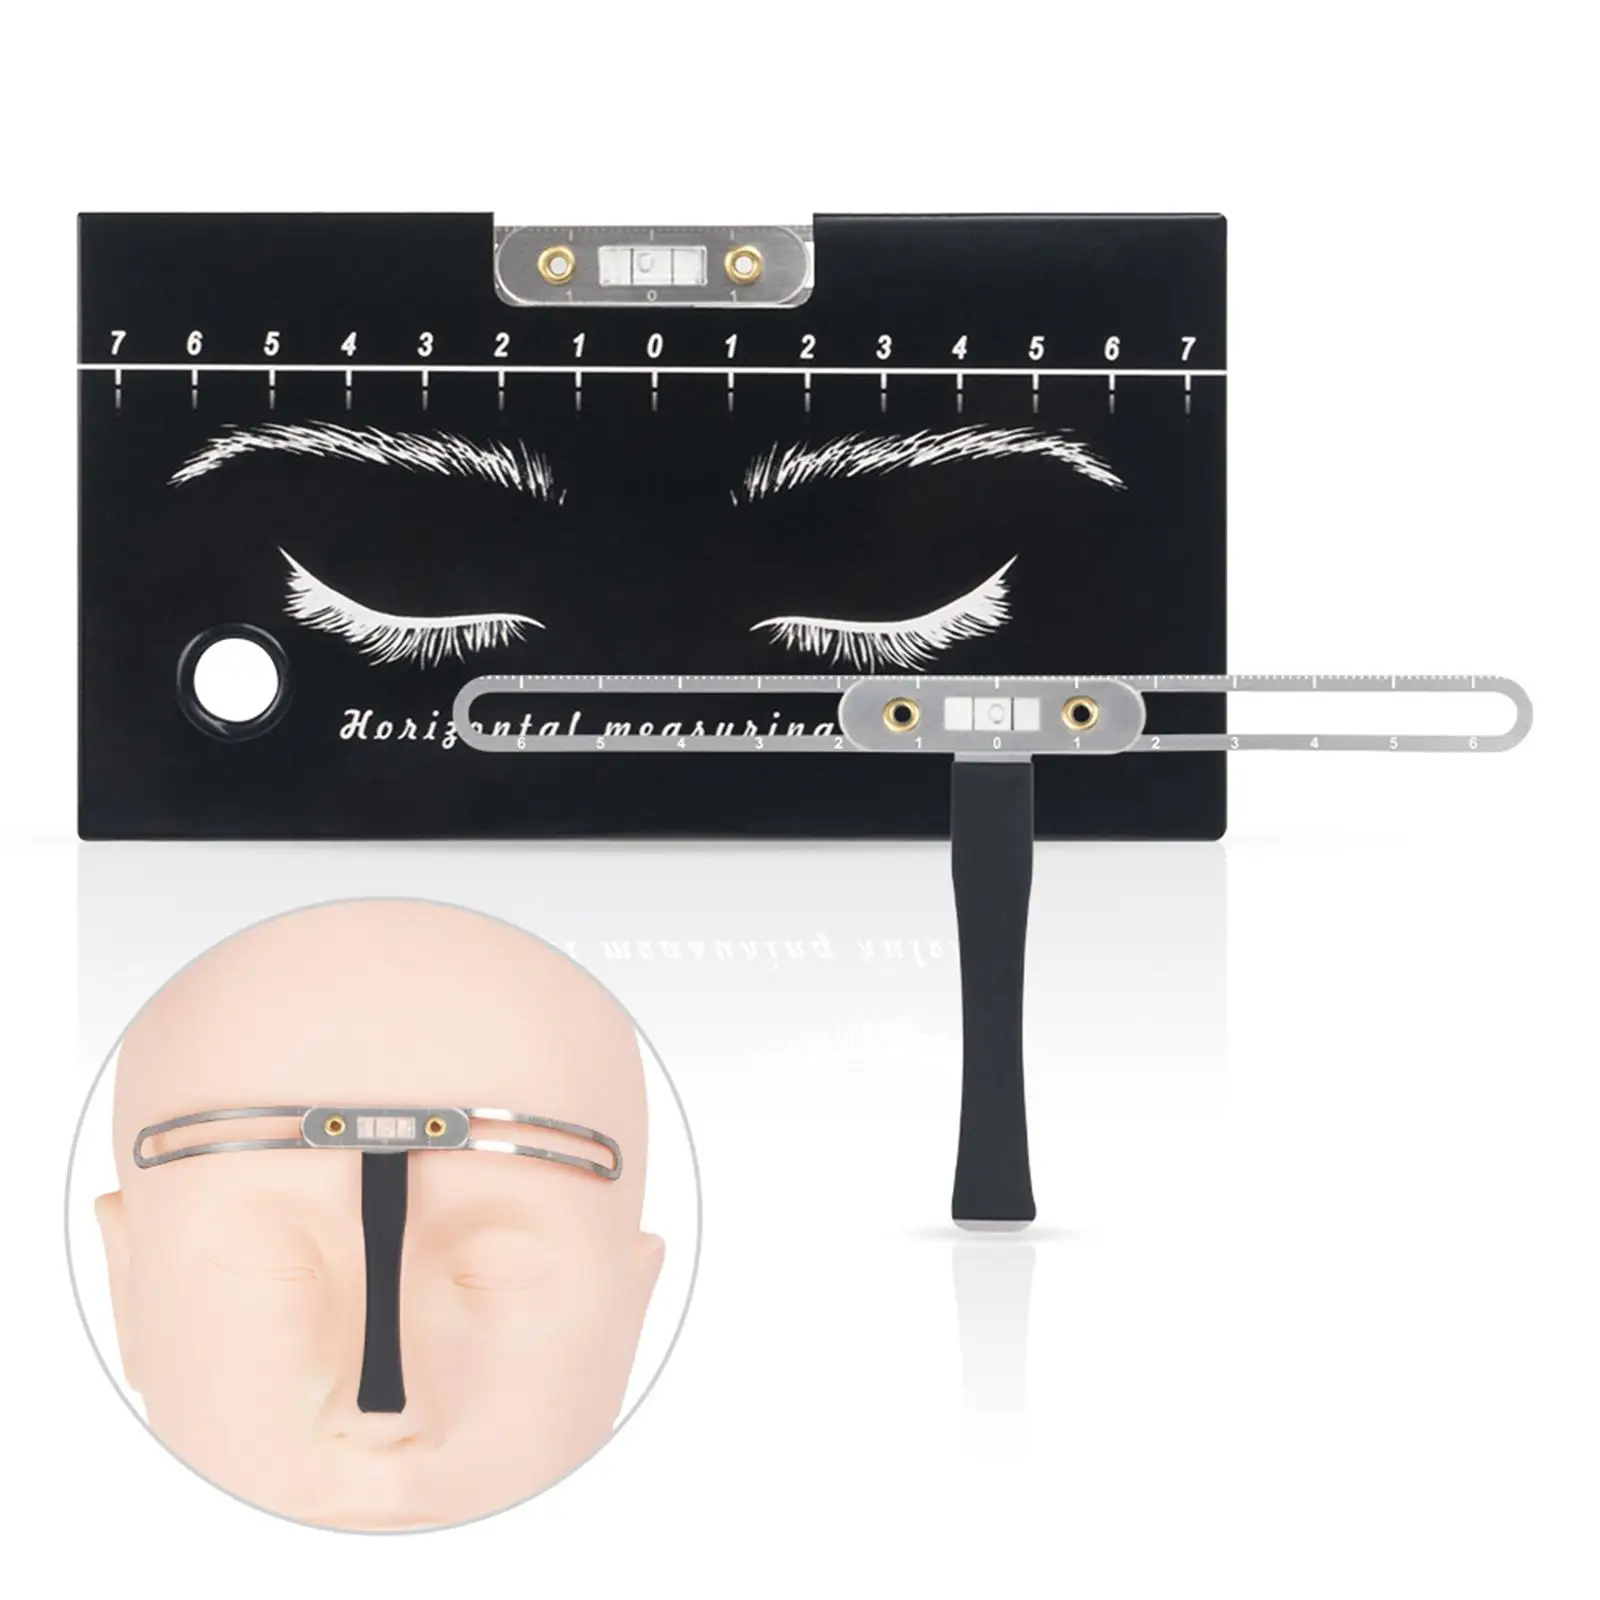 Eyebrow Caliper Makeup Accessories DIY Ruler Calipers Symmetrical Tool Eyebrow Extension Permanent Tattoo Positioning Shaping